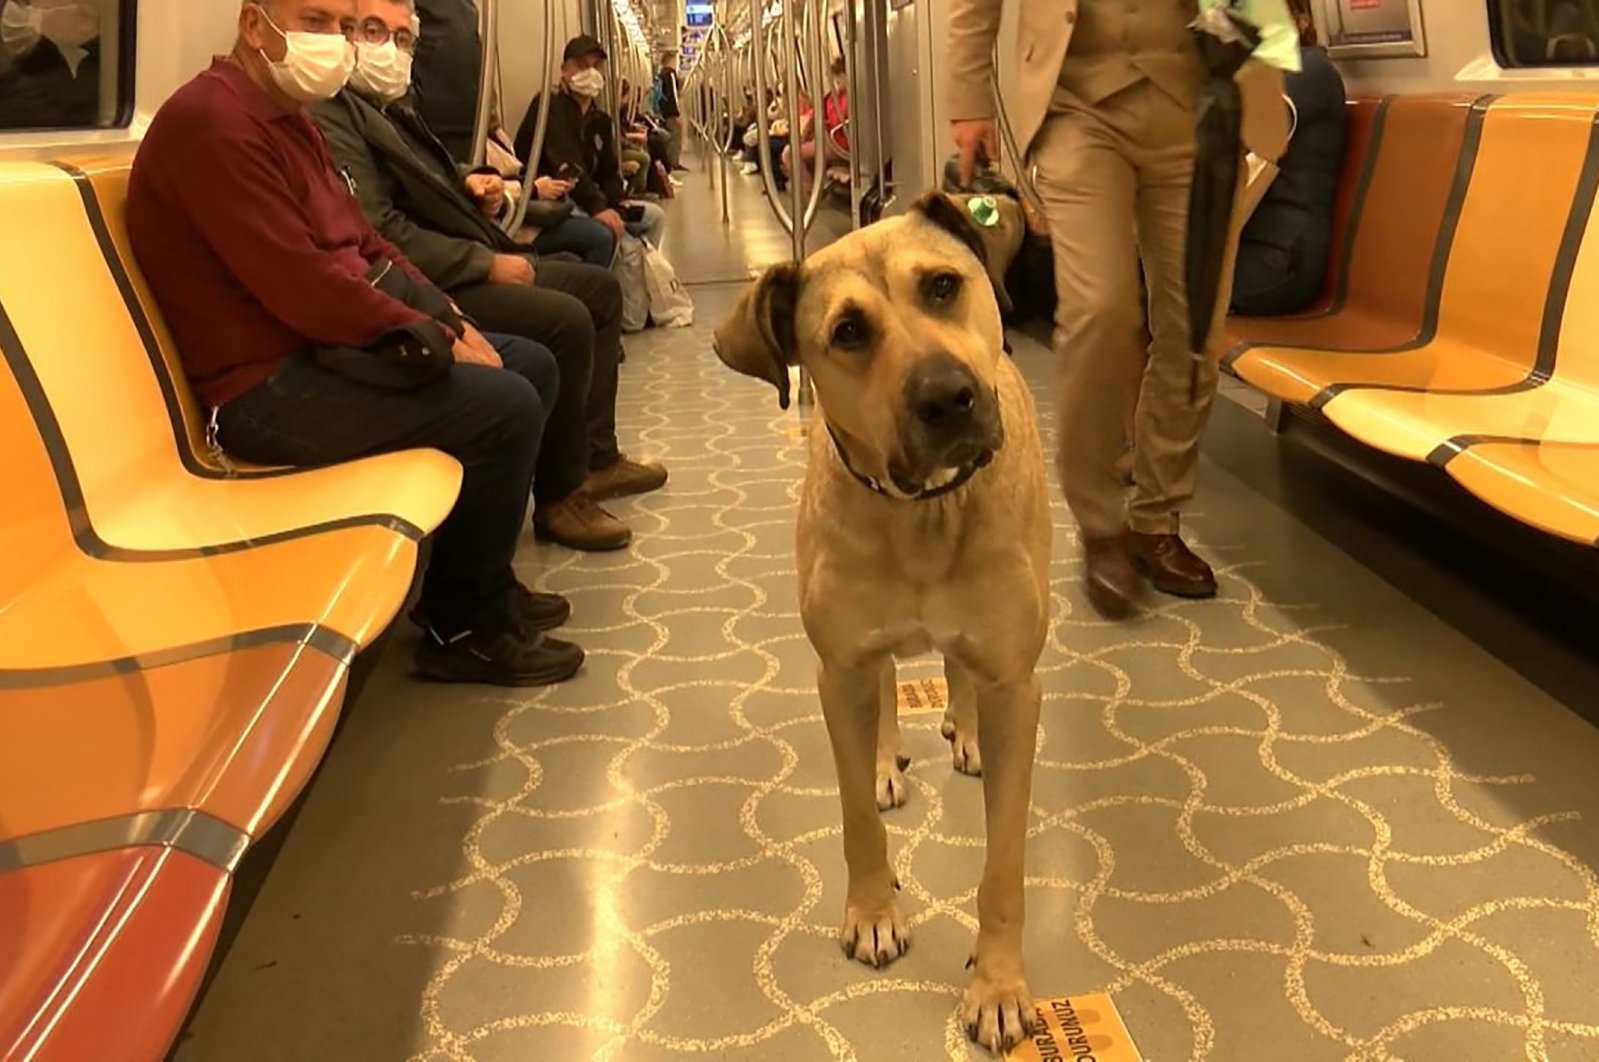 A view of Boji during one of his rides on the metro in Istanbul, Turkey, Oct. 5, 2021. (DHA PHOTO)